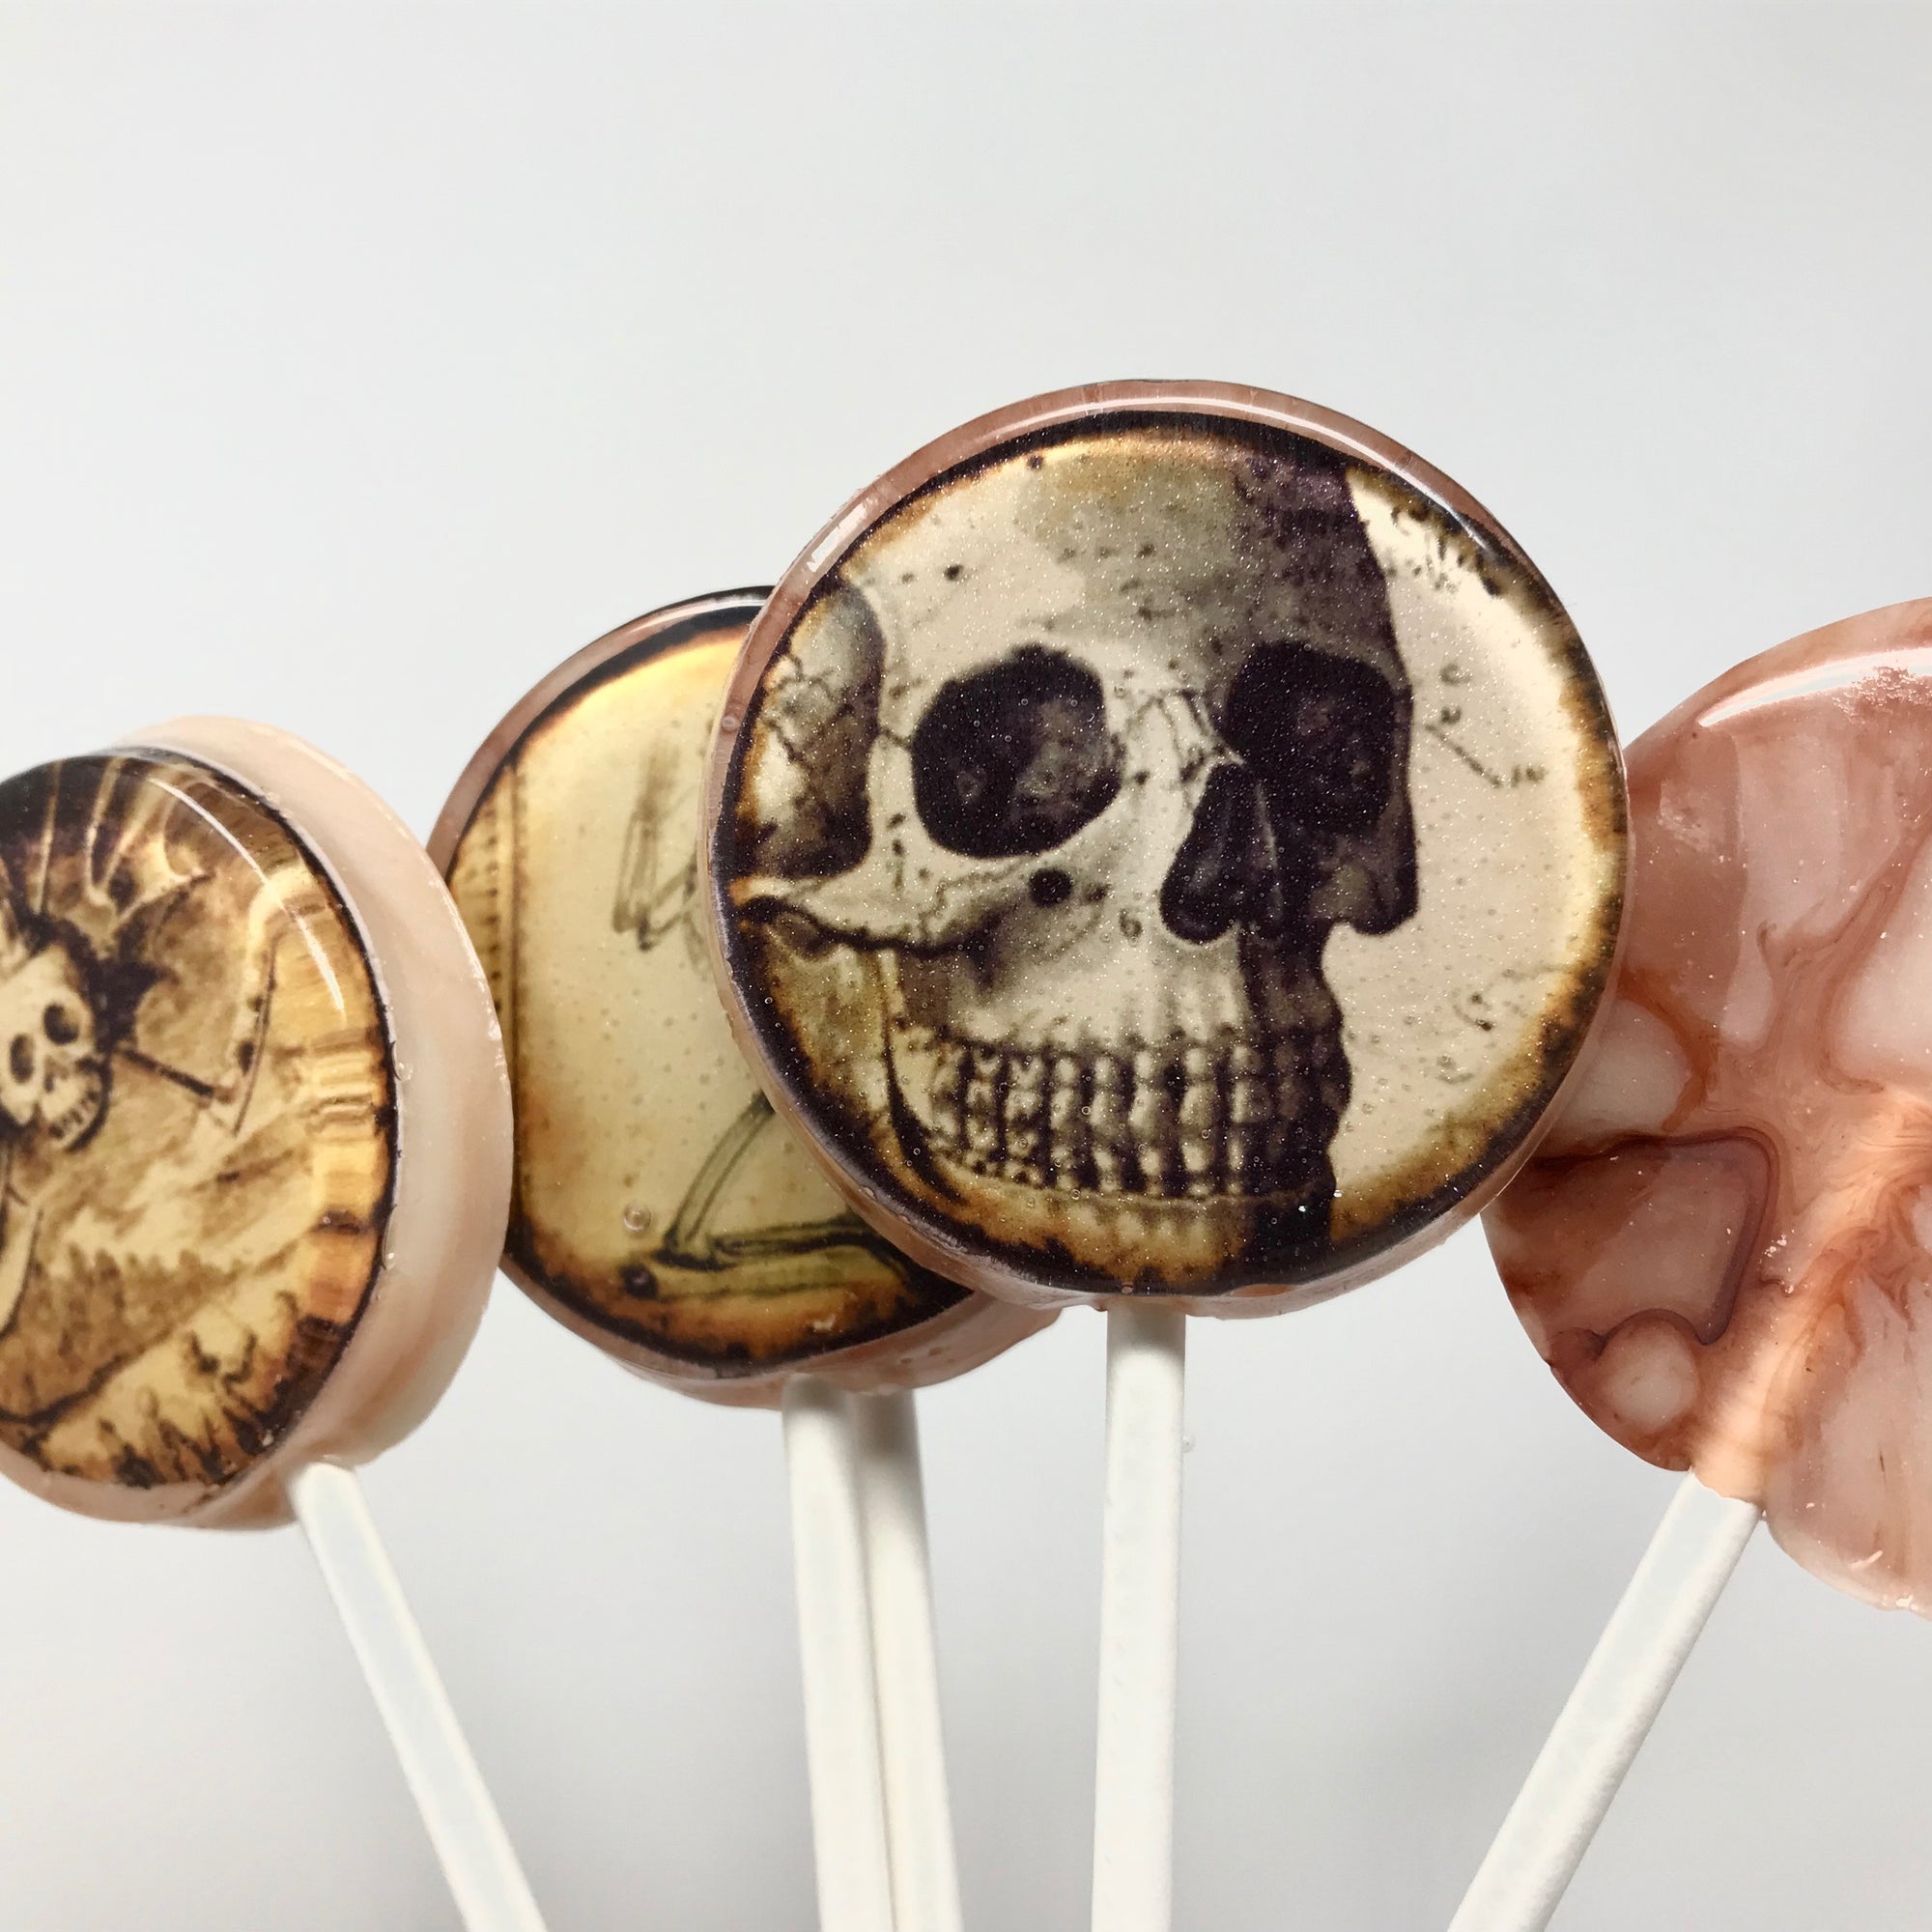 Gruesome Skeleton Lollipops 5-piece set by I Want Candy!